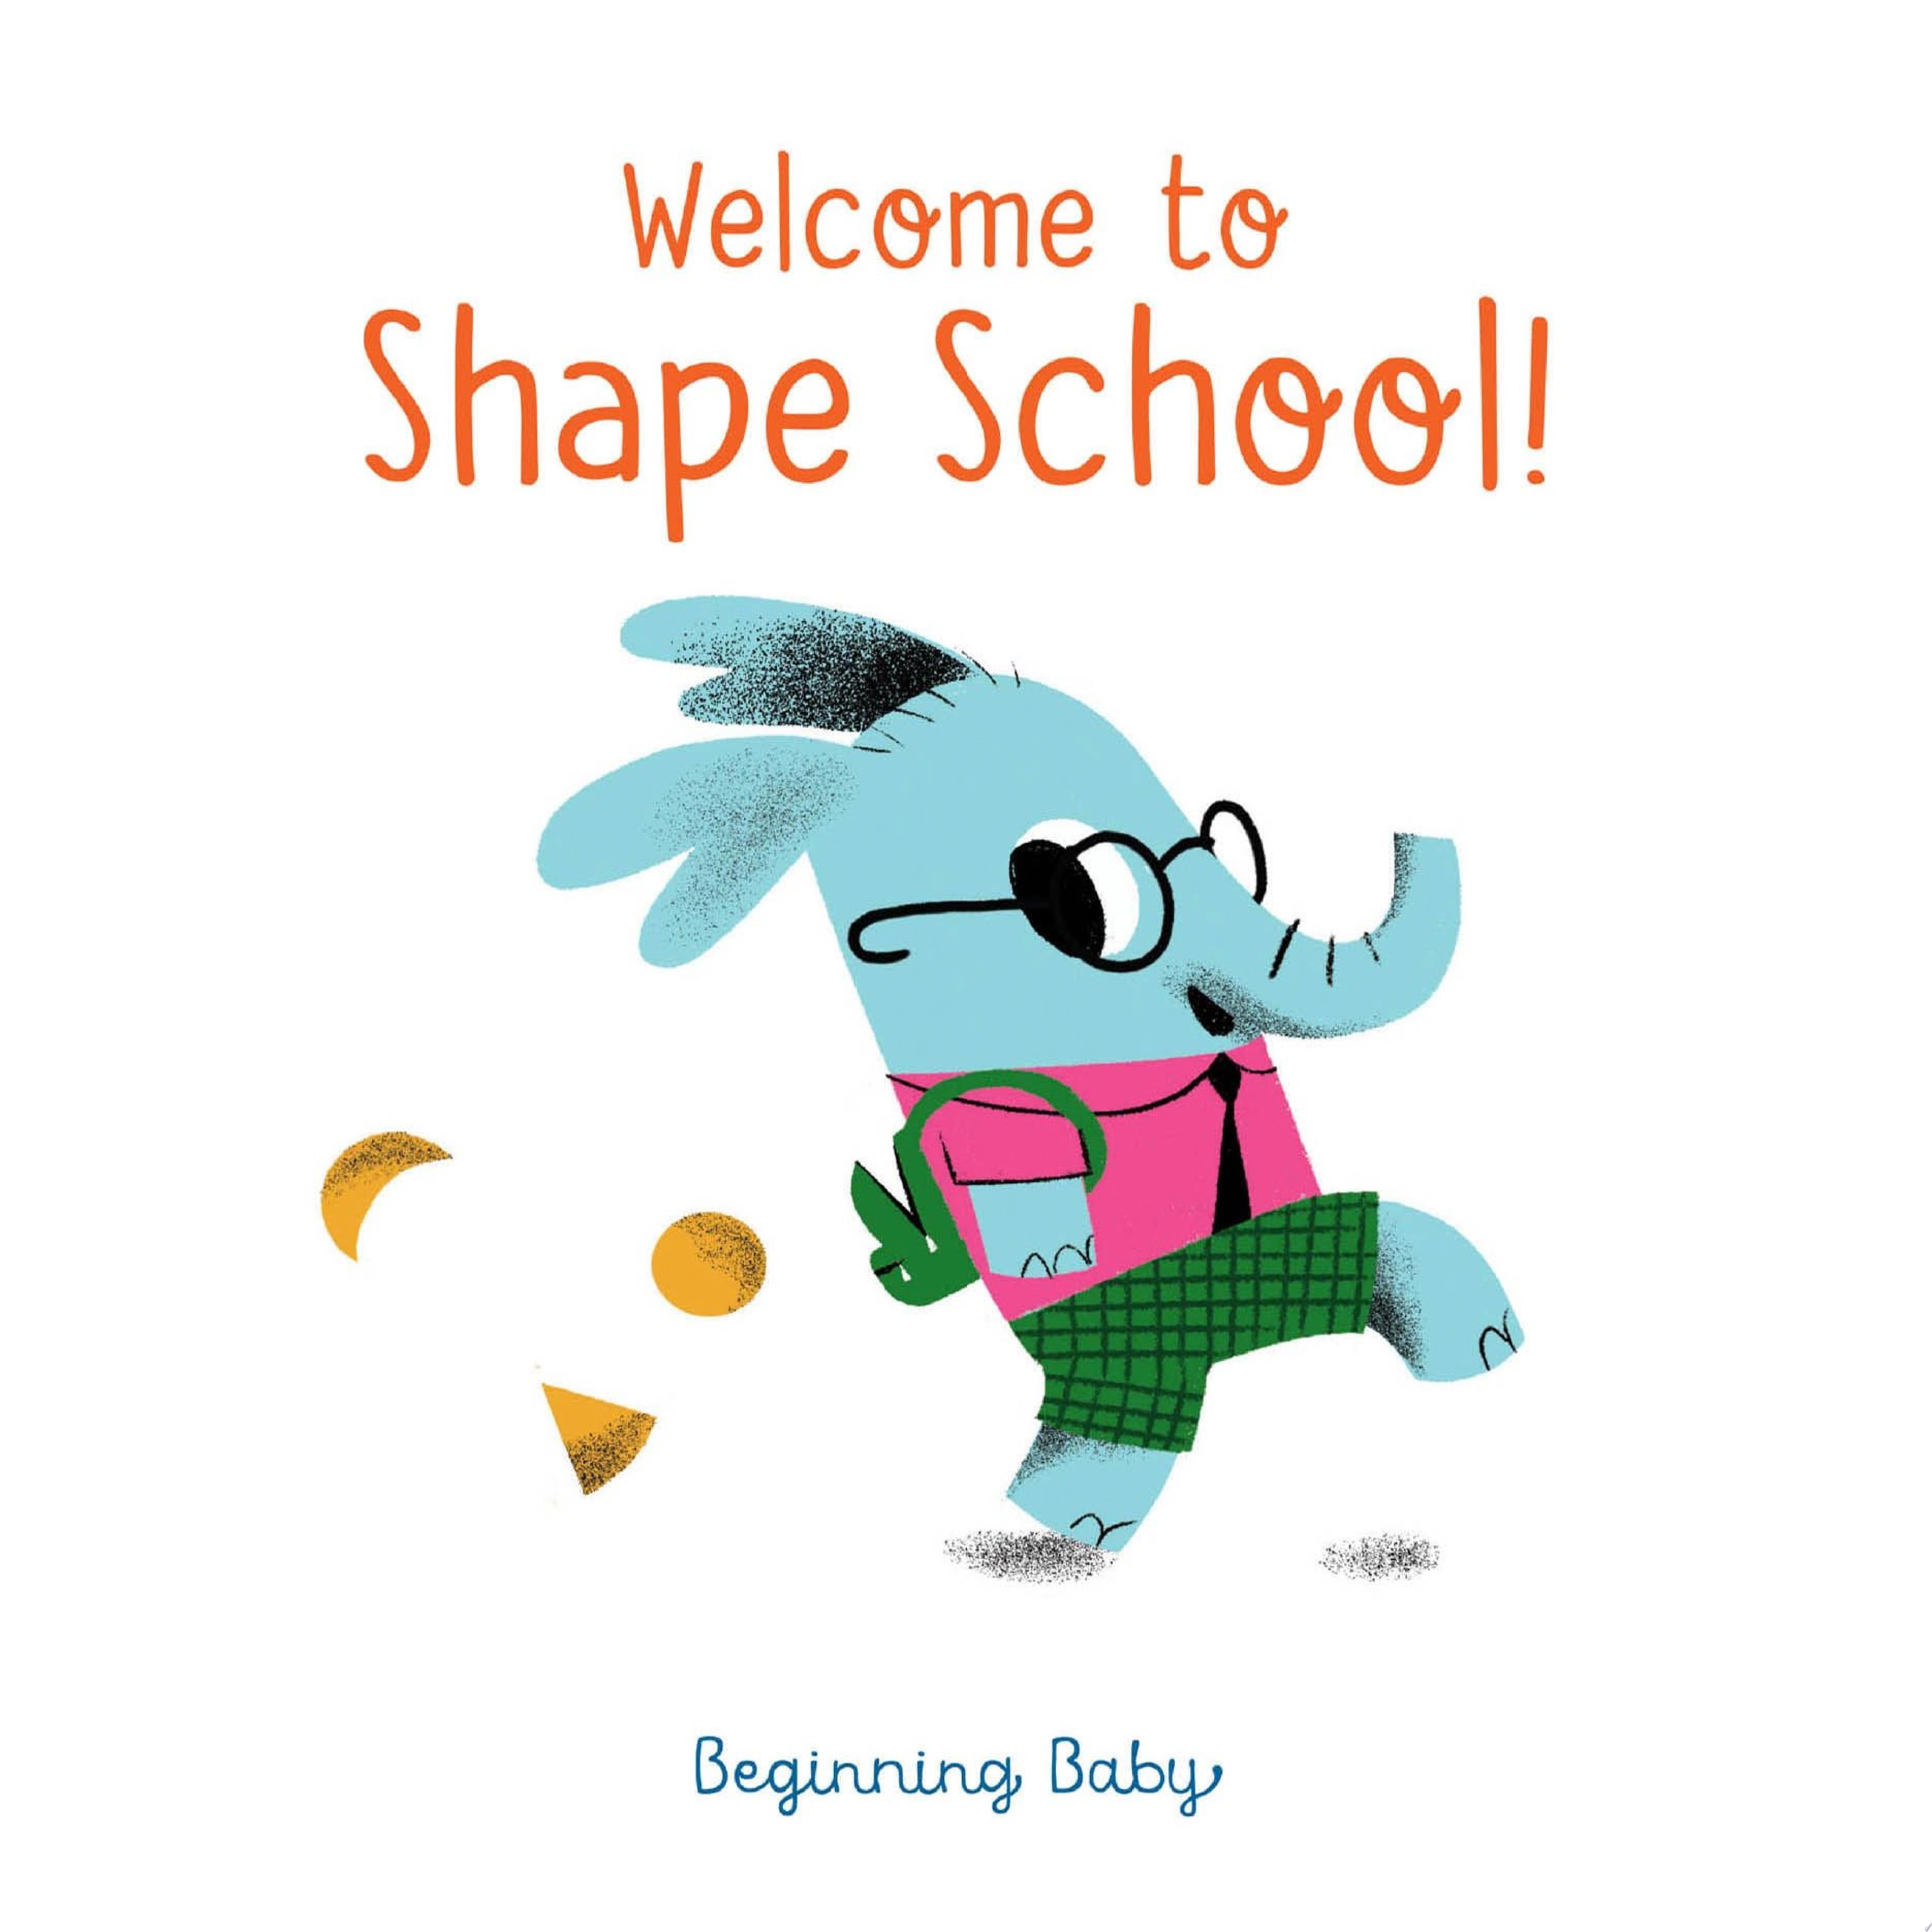 Image for "Welcome To Shape School!"